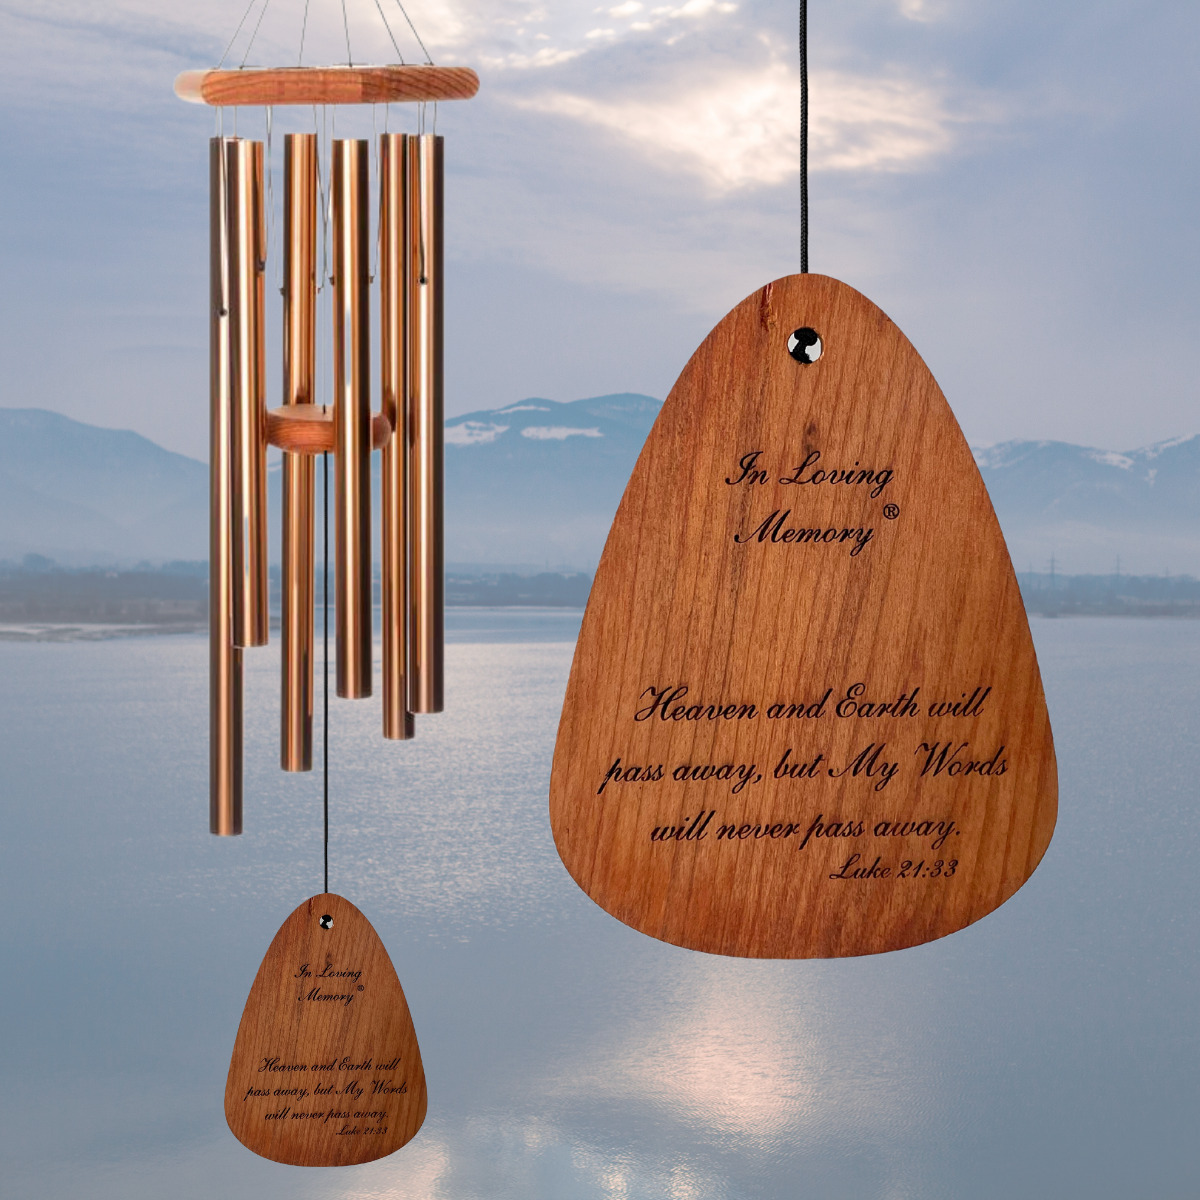 In Loving Memory 35 Inch Windchime - My Words will never pass away... in Bronze